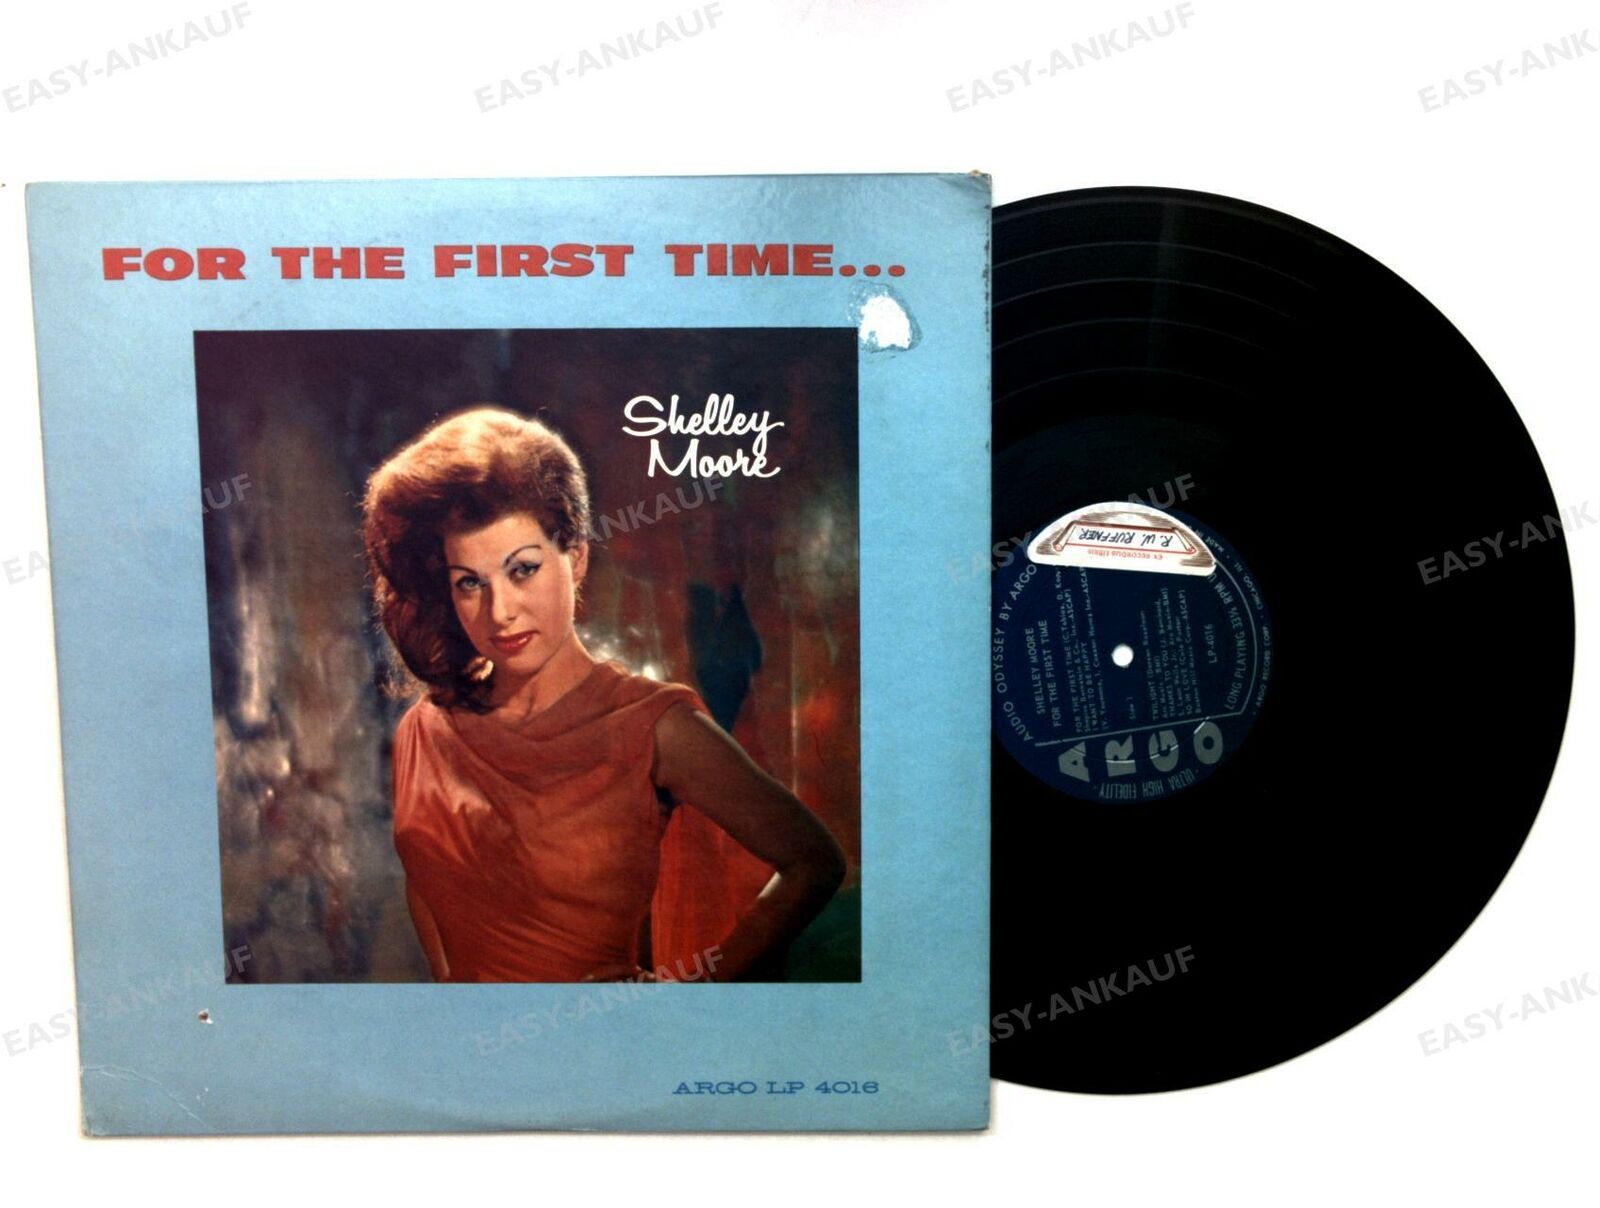 Shelley Moore - For The First Time... US LP 1962 .*